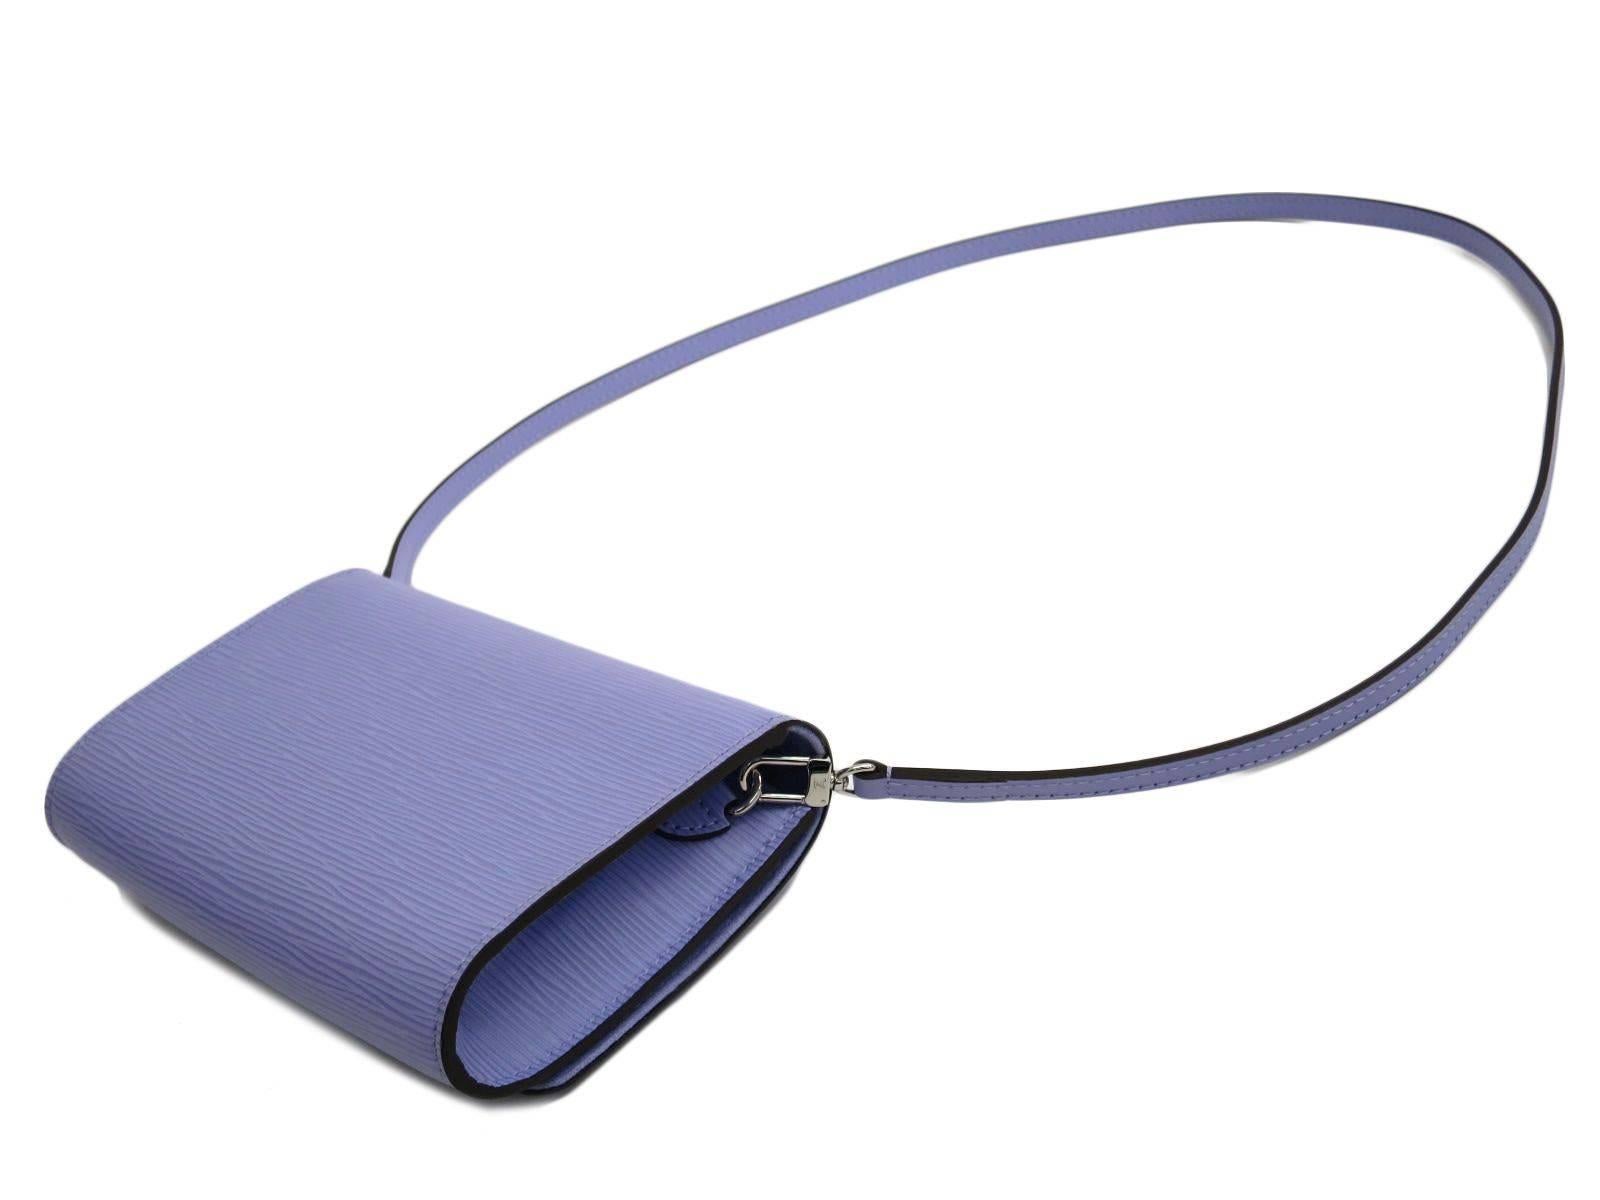 CURATOR'S NOTES

No description necessary! Gorgeous lavender Louis Vuitton Louise clutch / shoulder bag. Priced to sell.

Epi leather
Flip lock closure
Made in France
Date code SR0194
Measures 7.7